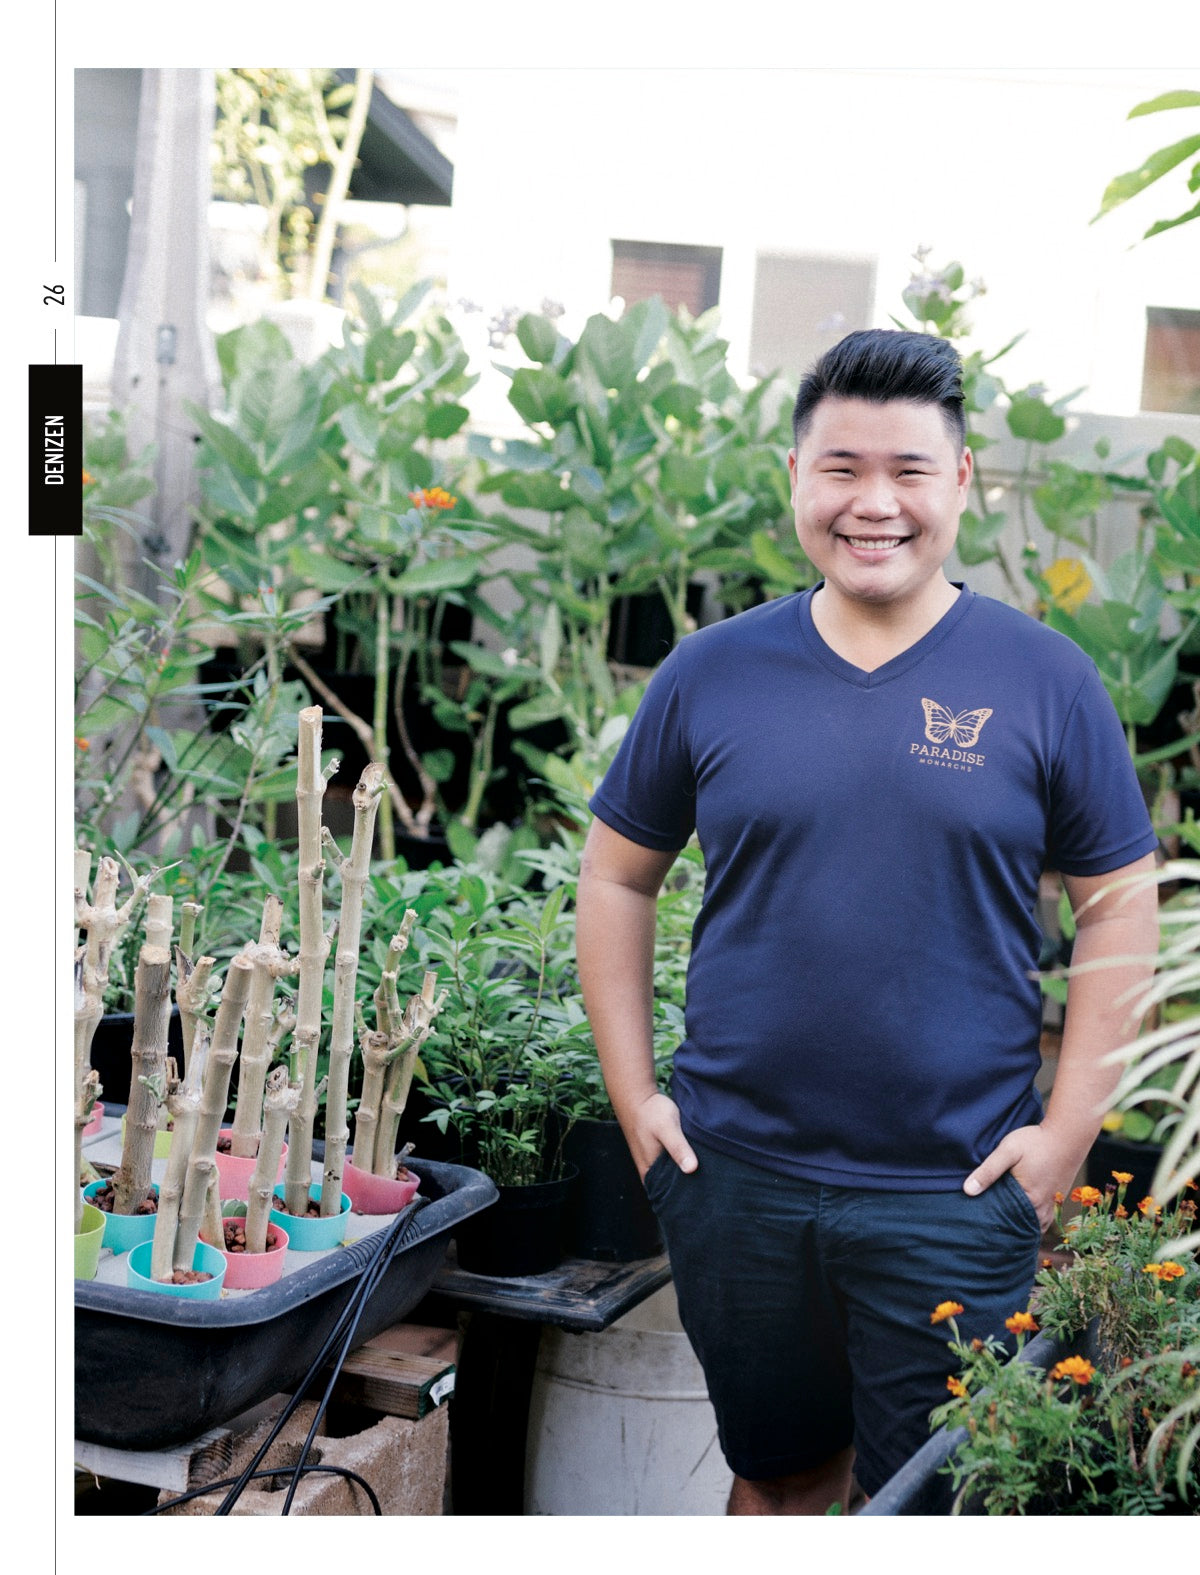 article feature in Kakaako vert magazine. A Hawaii's local publication based in Ward, Kakaako, Honolulu, Oahu, Hawaii. It's a local lifestyle and business magazine. Featuring owner & butterfly dad, Henry Fang. 